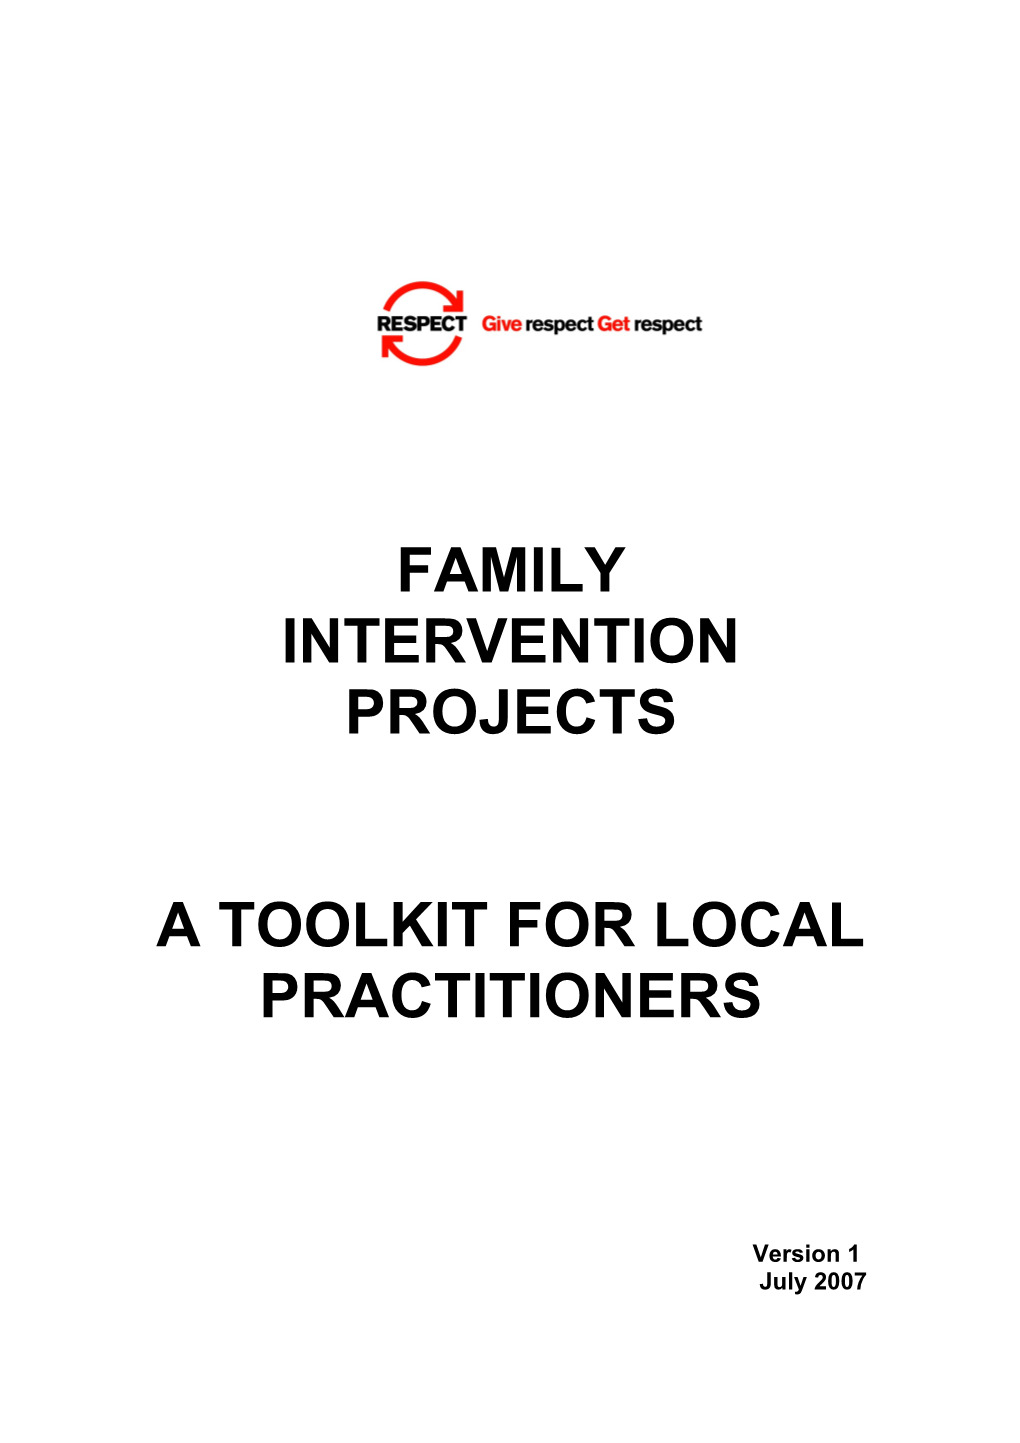 Who Do Family Intervention Projects Target and Why?P 5